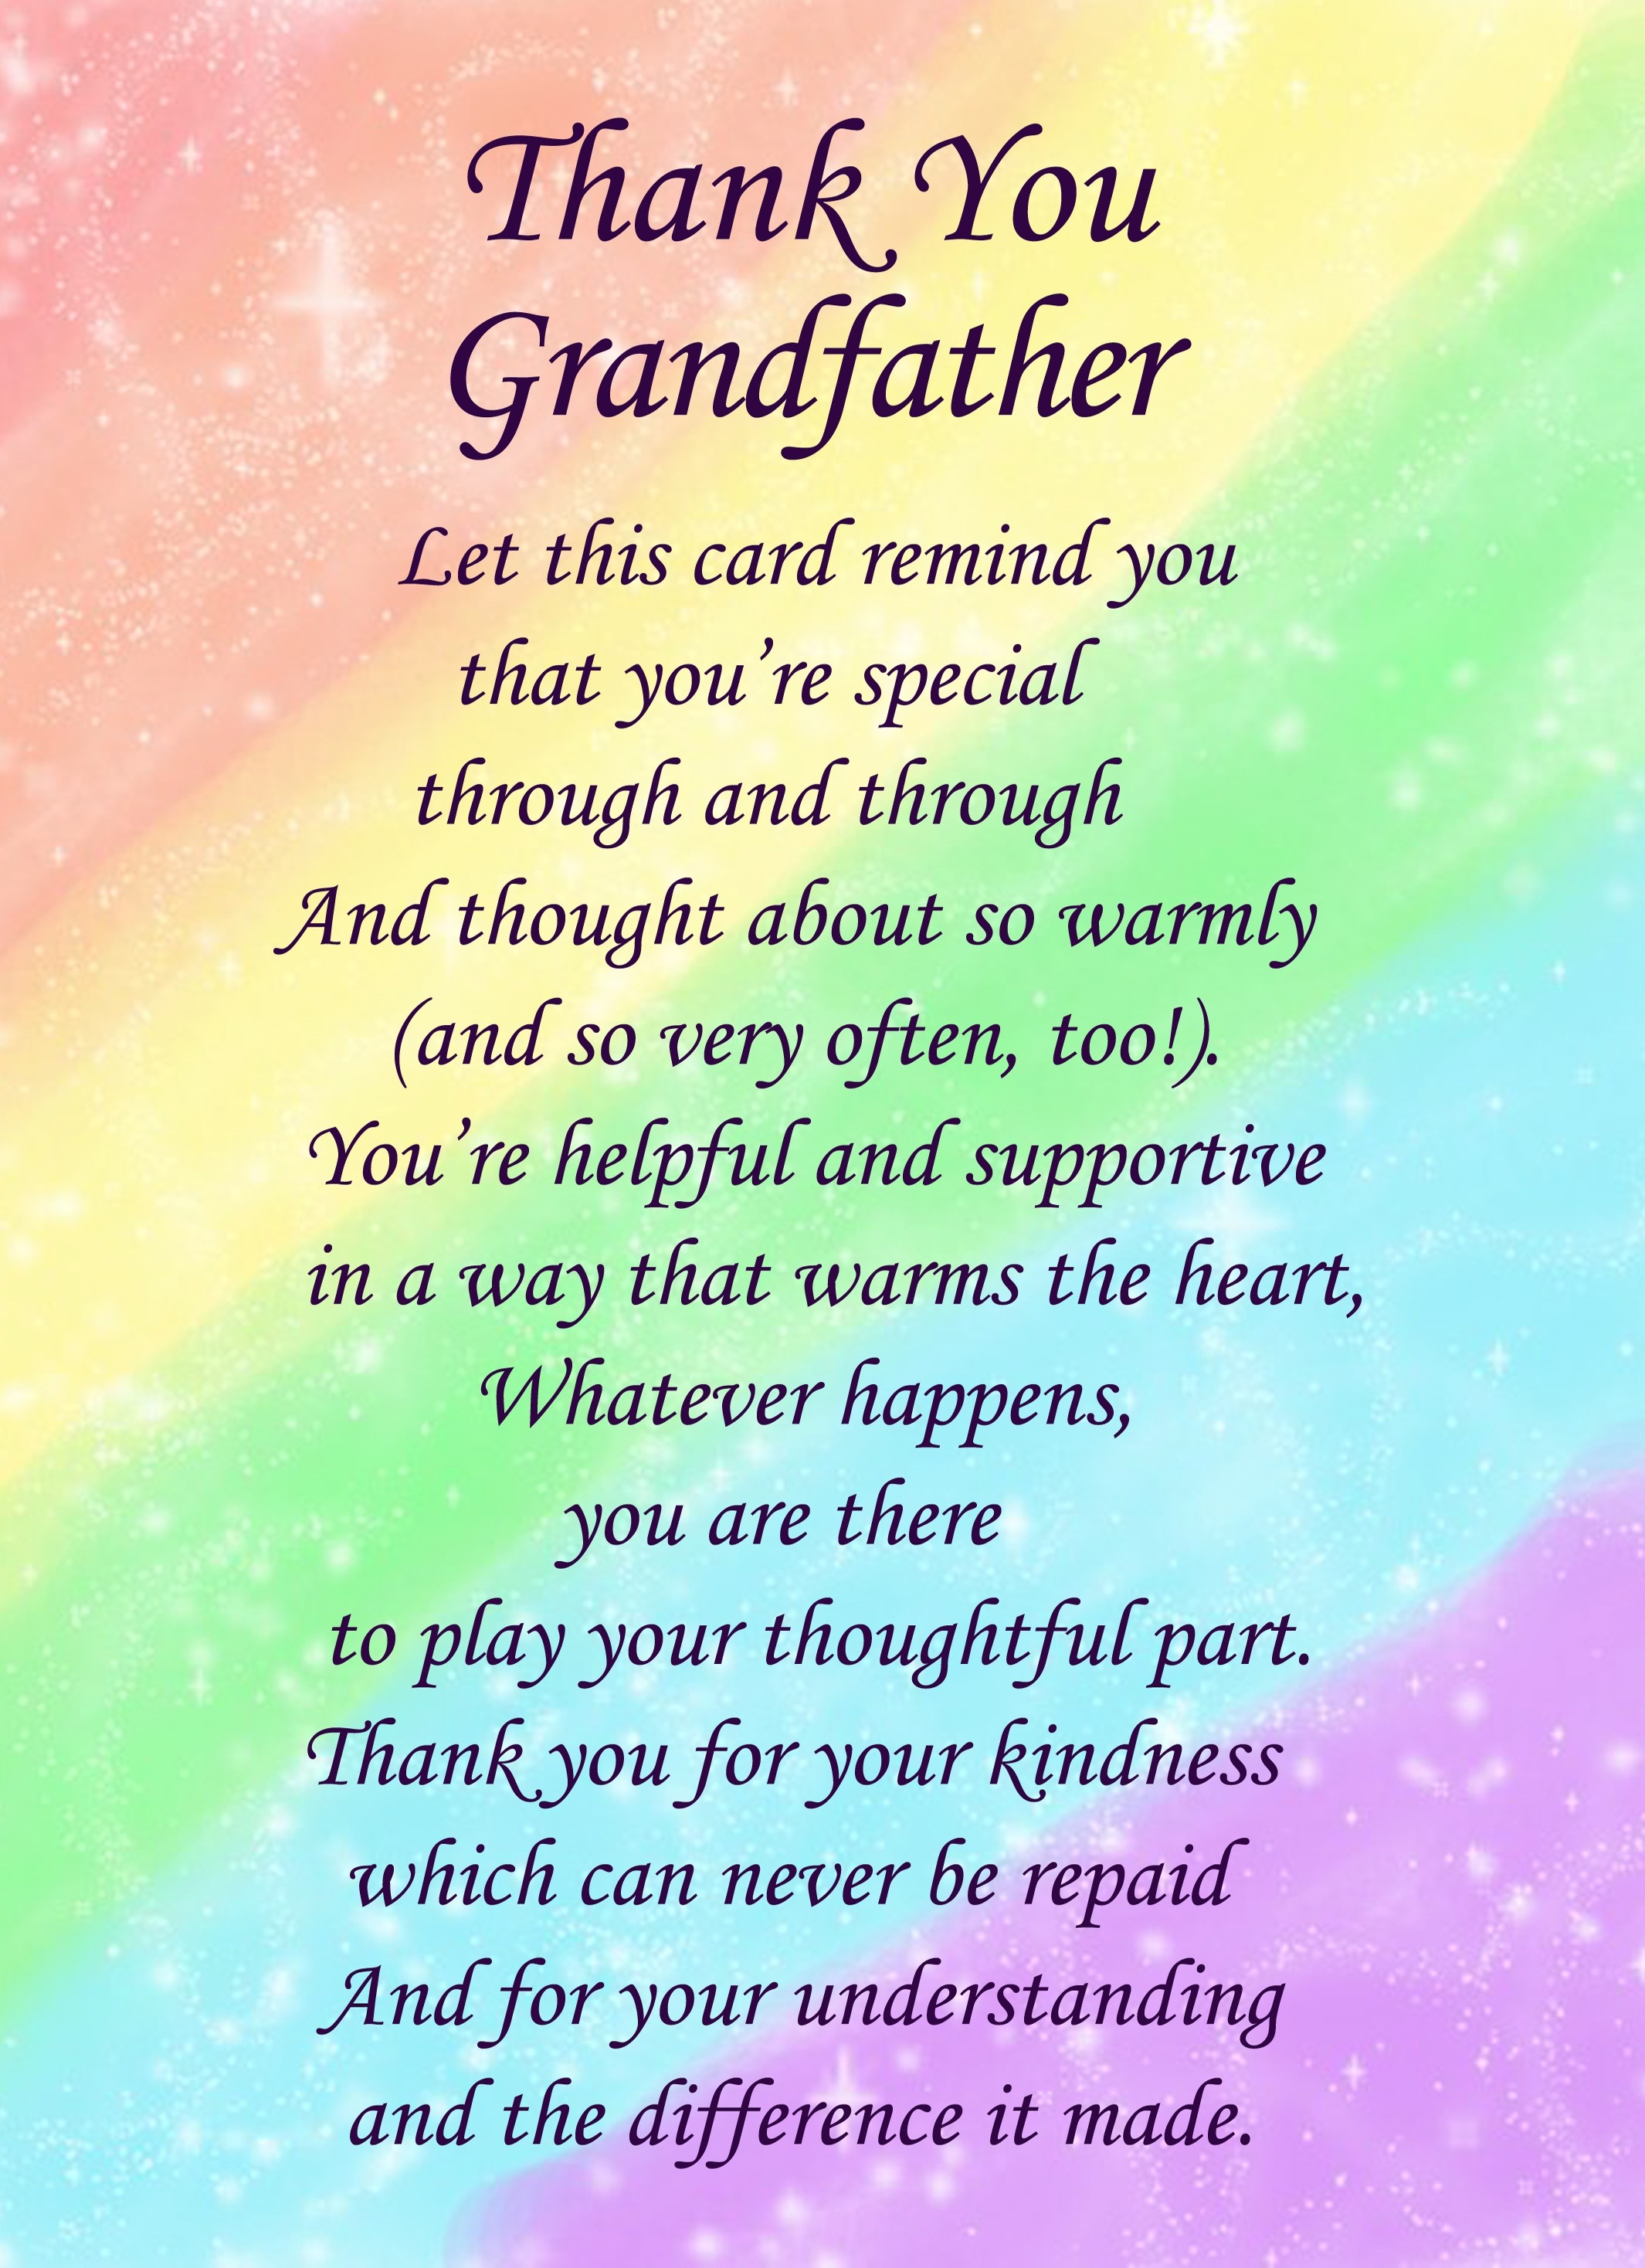 Thank You 'Grandfather' Poem Verse Greeting Card